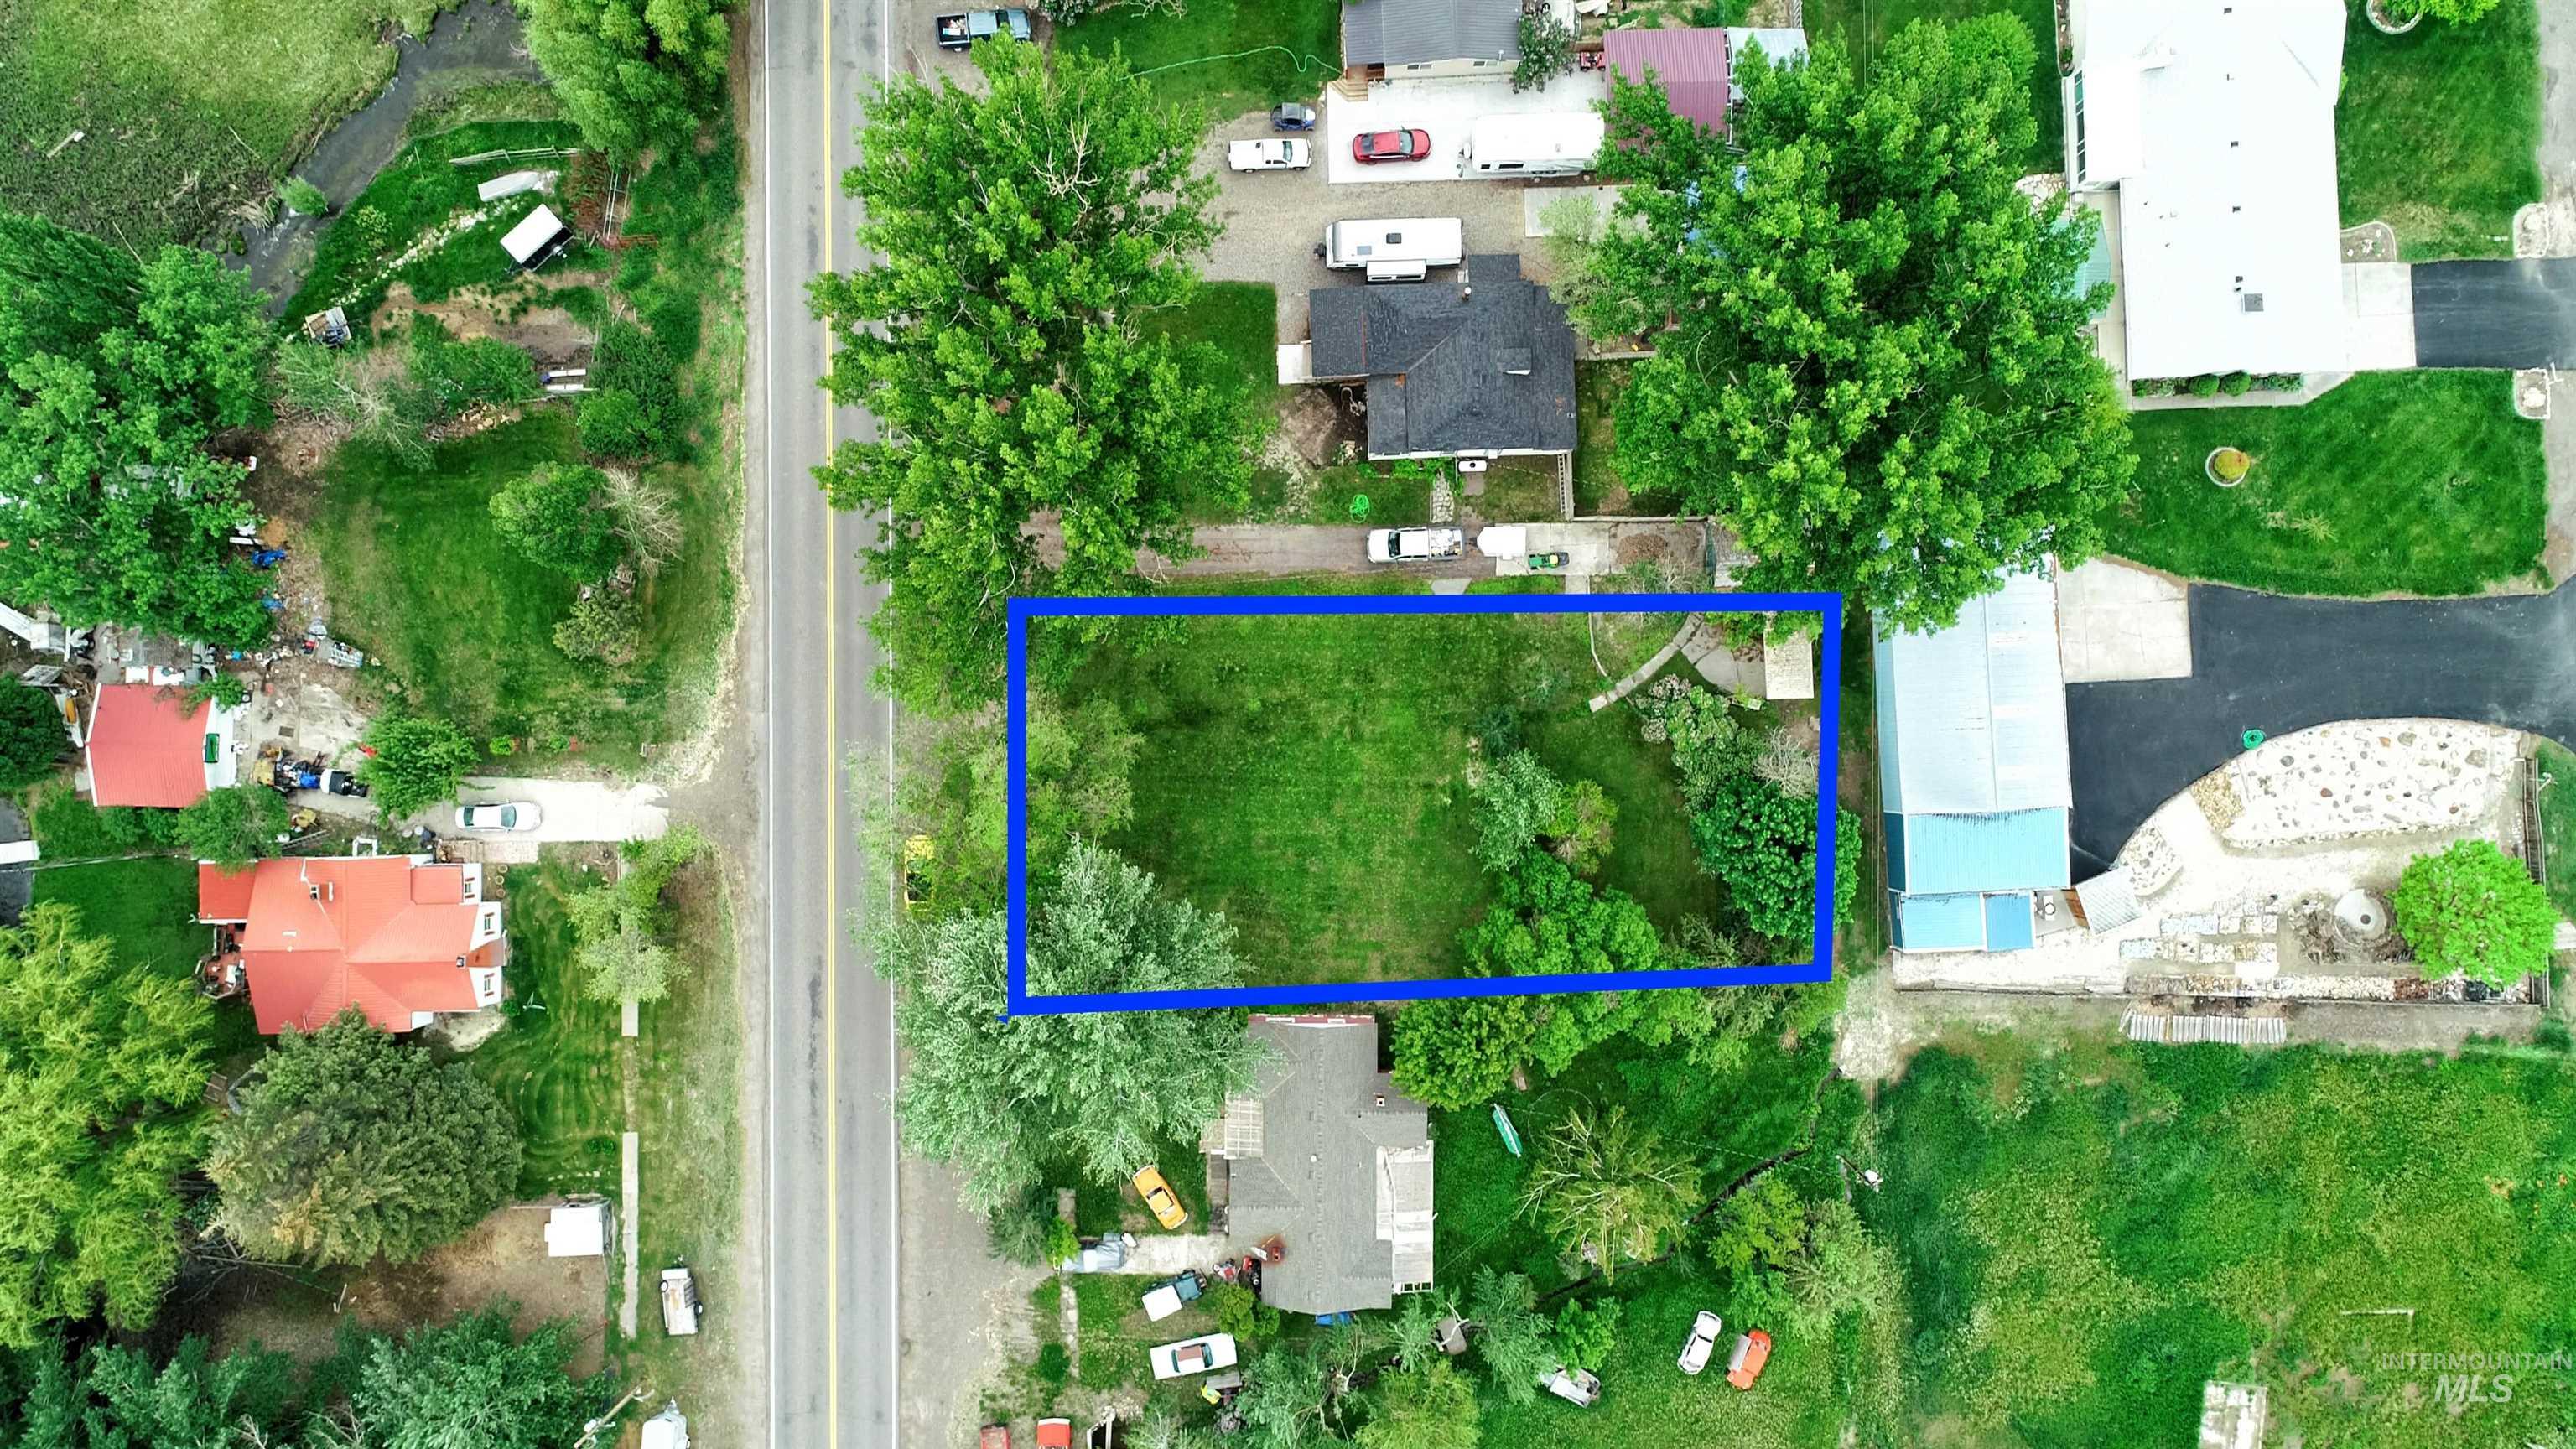 324 S Main St, Albion, Idaho 83311, Land For Sale, Price $95,000,MLS 98896977